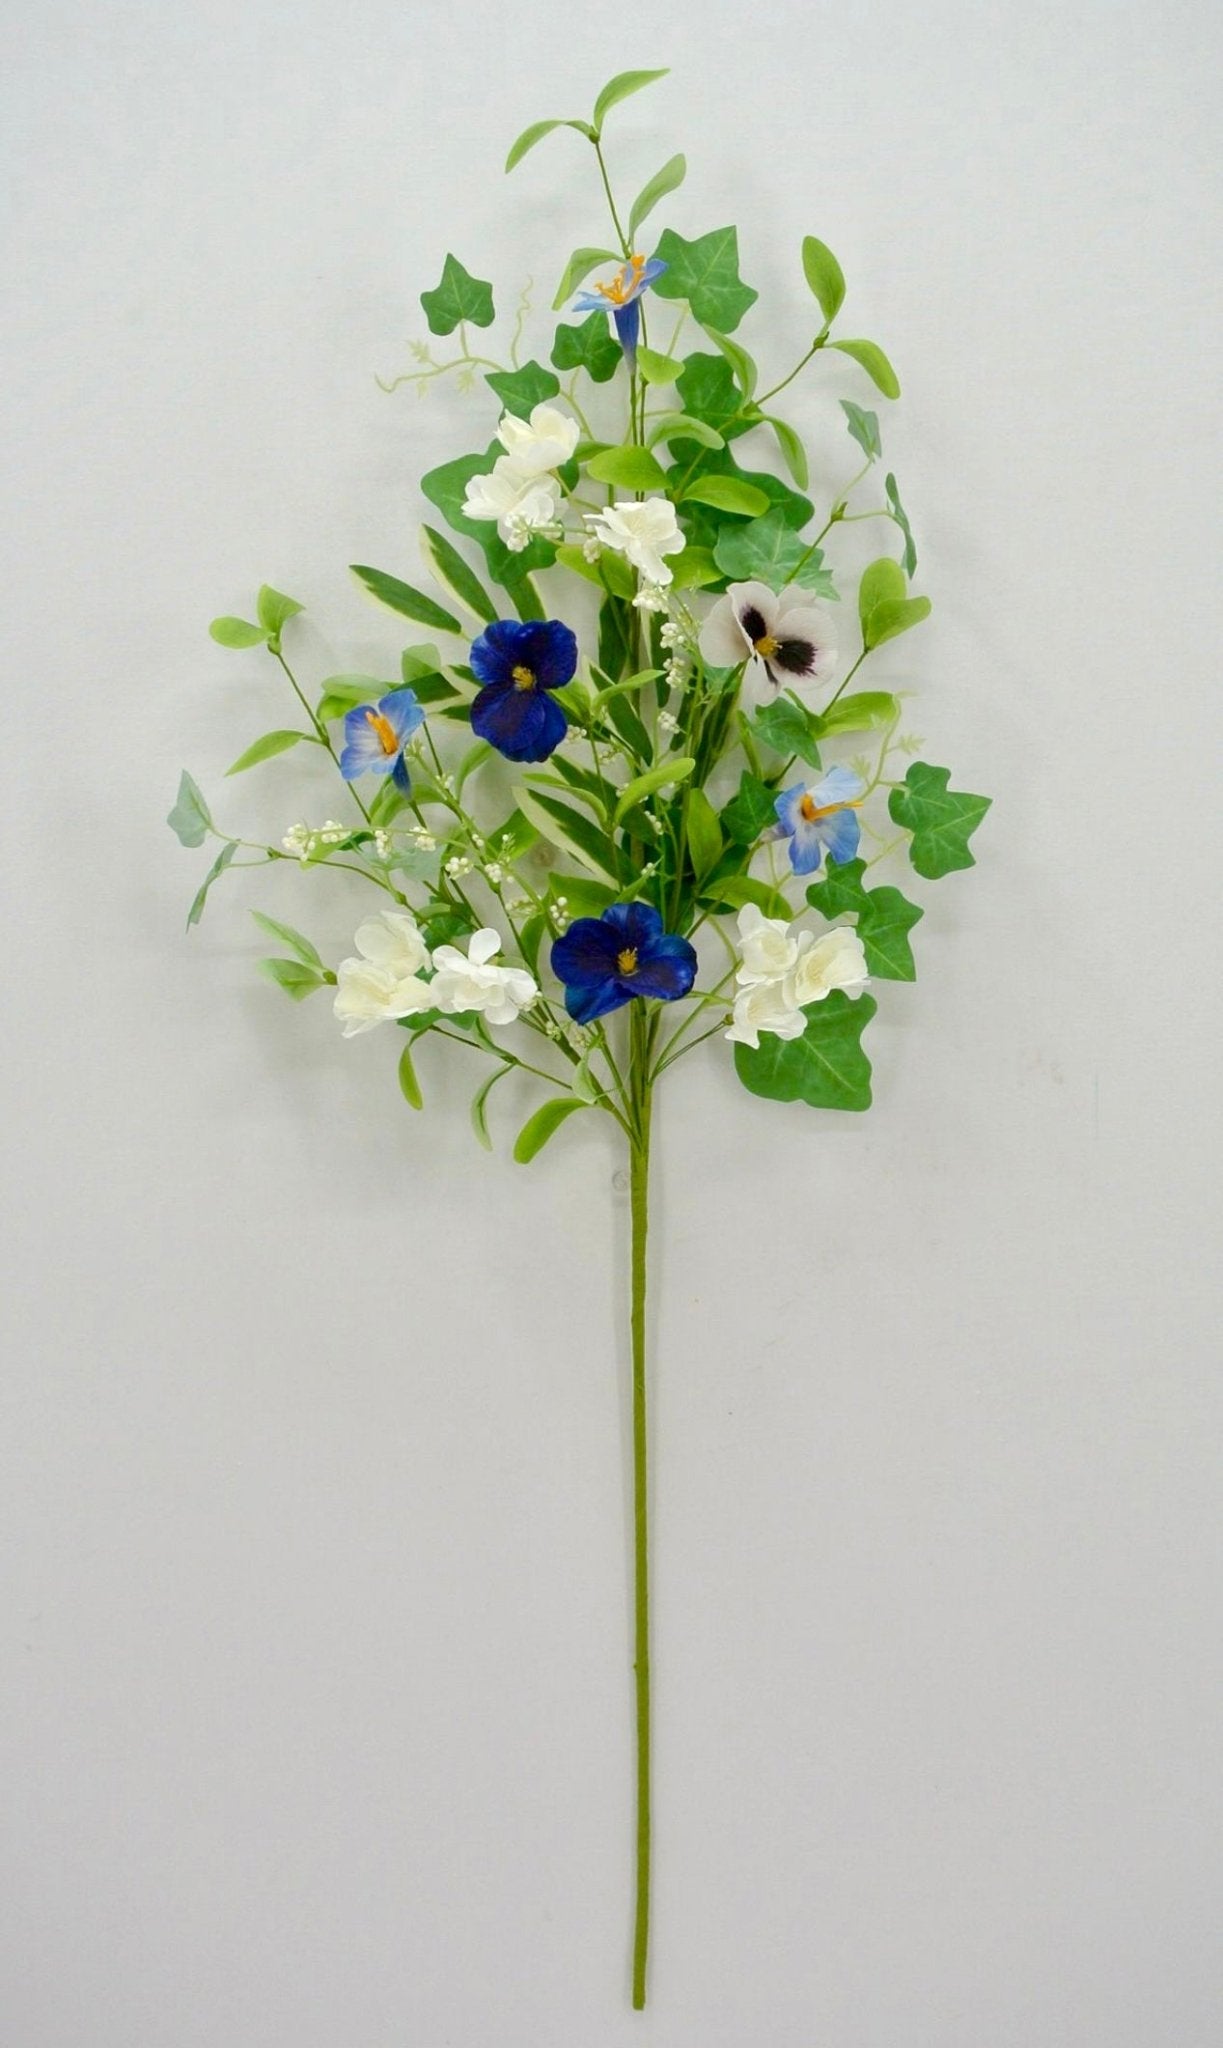 Pansy, violets, and greenery spray - Greenery Marketartificial flowers63997